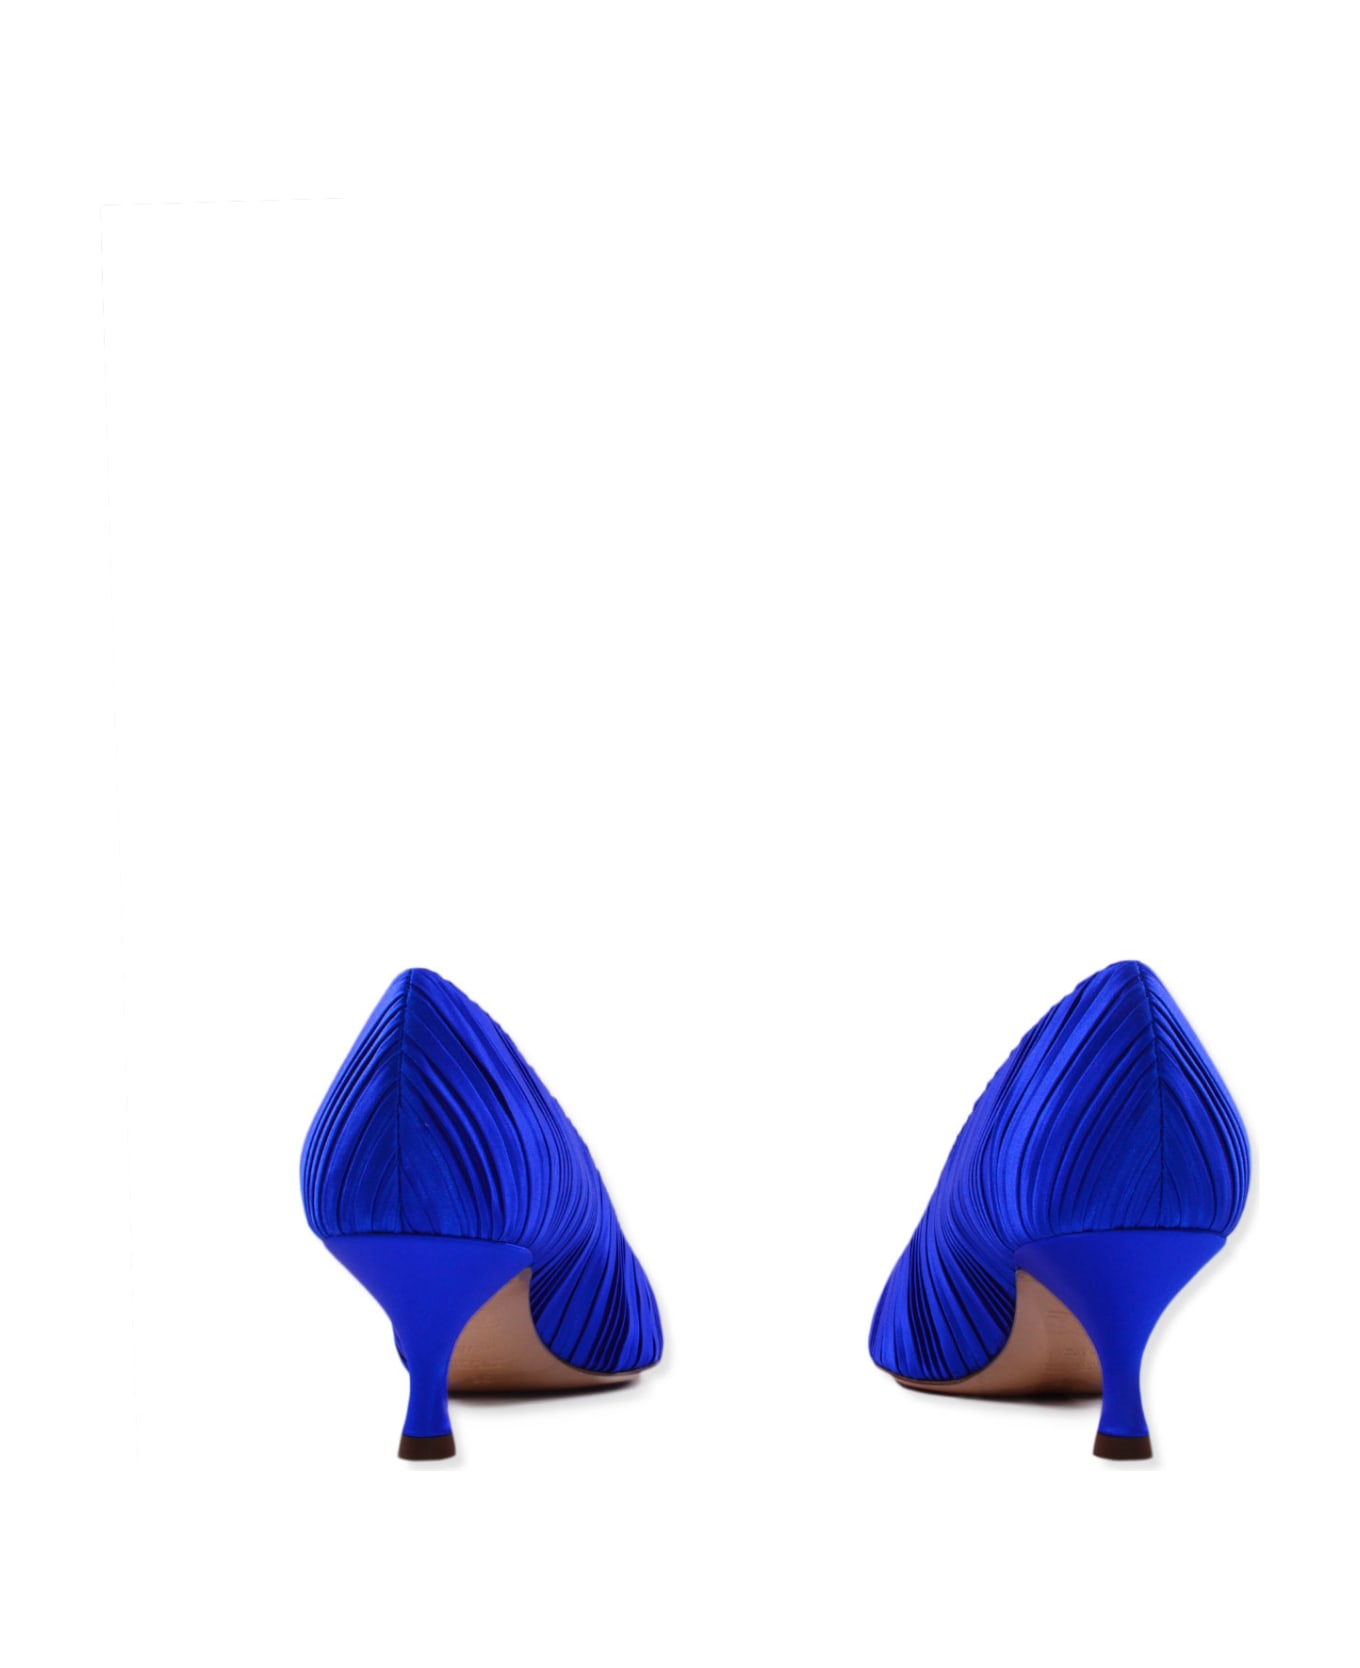 Casadei Pump In Pleated Satin - Blue ハイヒール